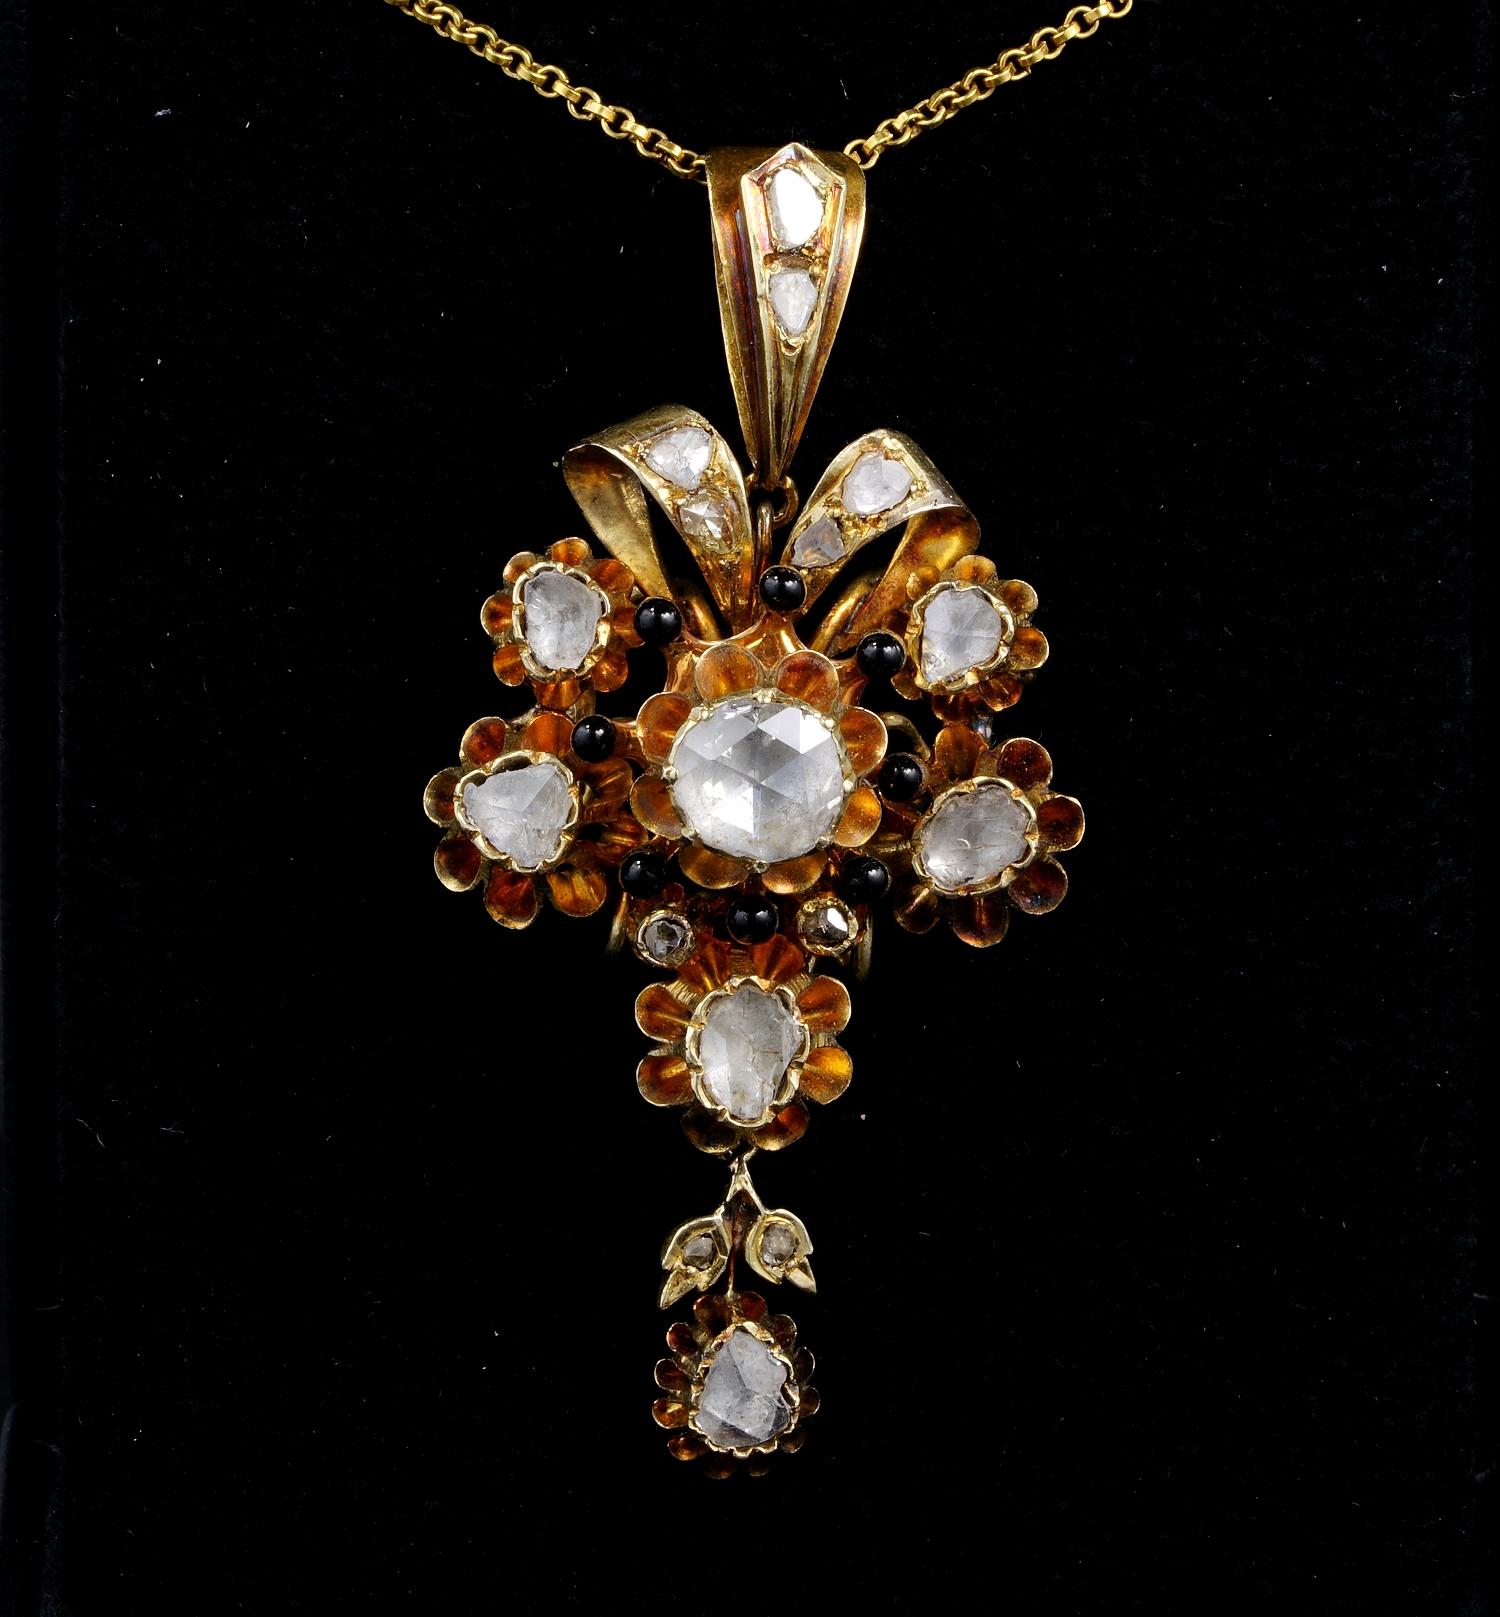 Amazing Georgian era large flower shaped Diamond pendant, can be used bypassing it through a black velvet or silk ribbon, or as pendant by its dedicated bail, which can completely separate from it
Breath taking workmanship of the 18th century boasts